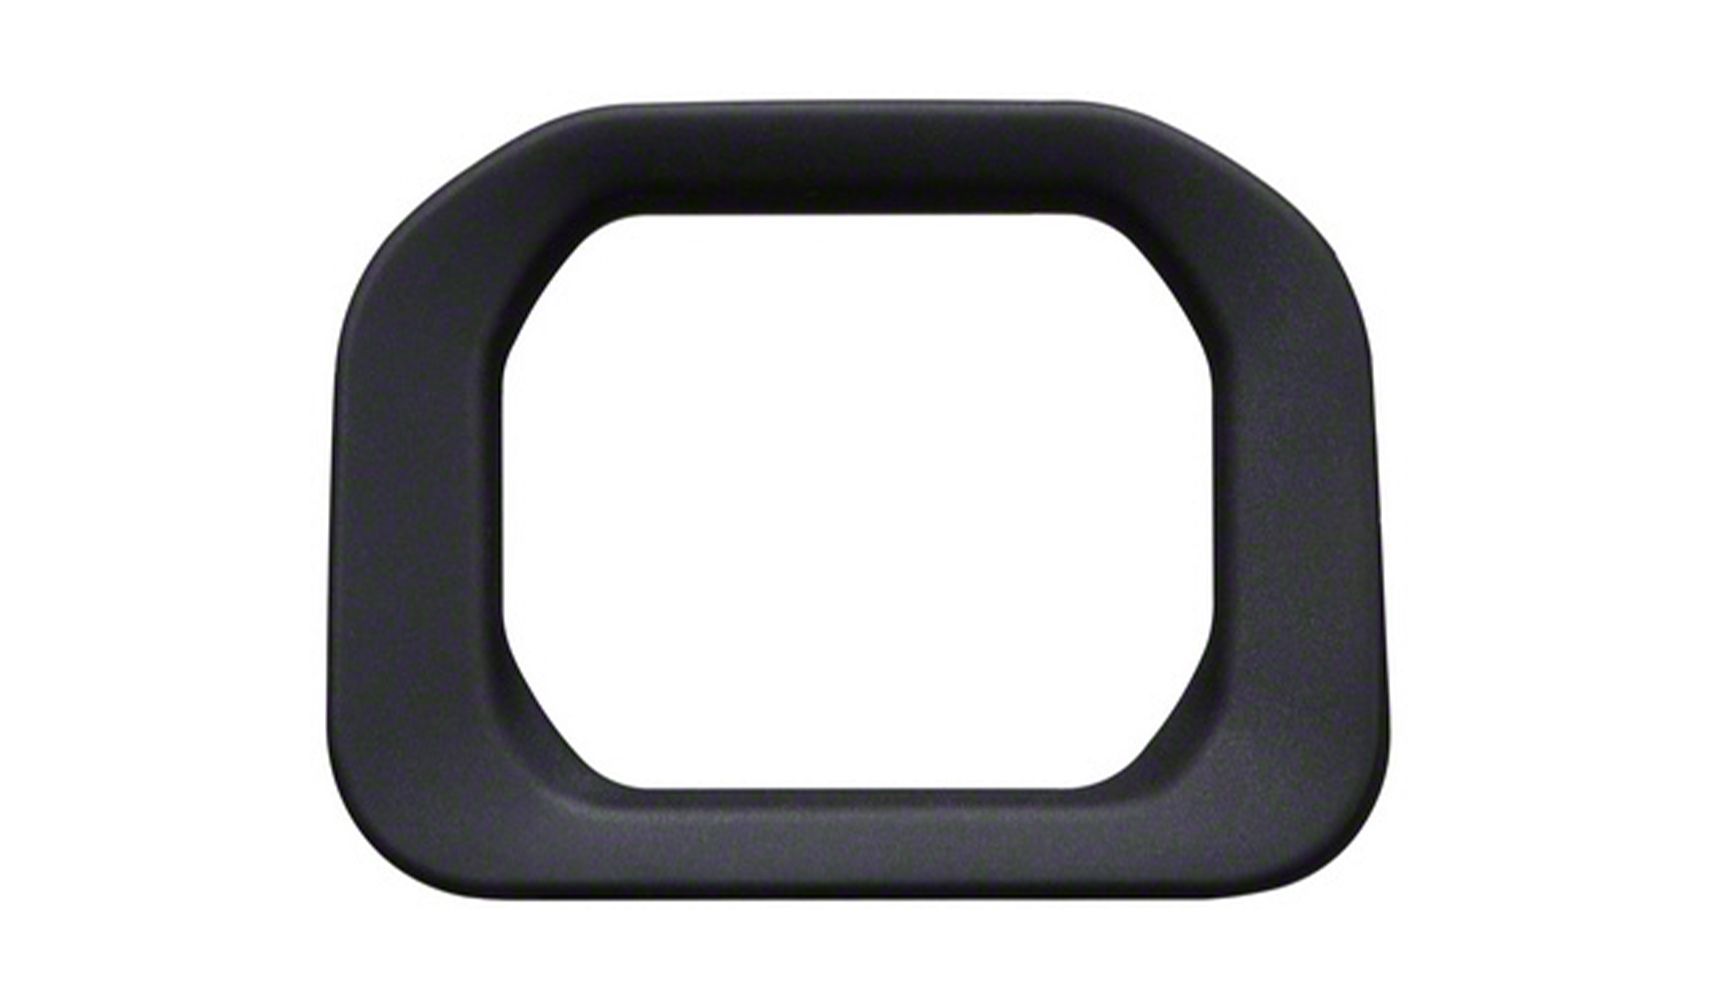 CANON - 6533C001 - Eyecup K499 for EOS R1